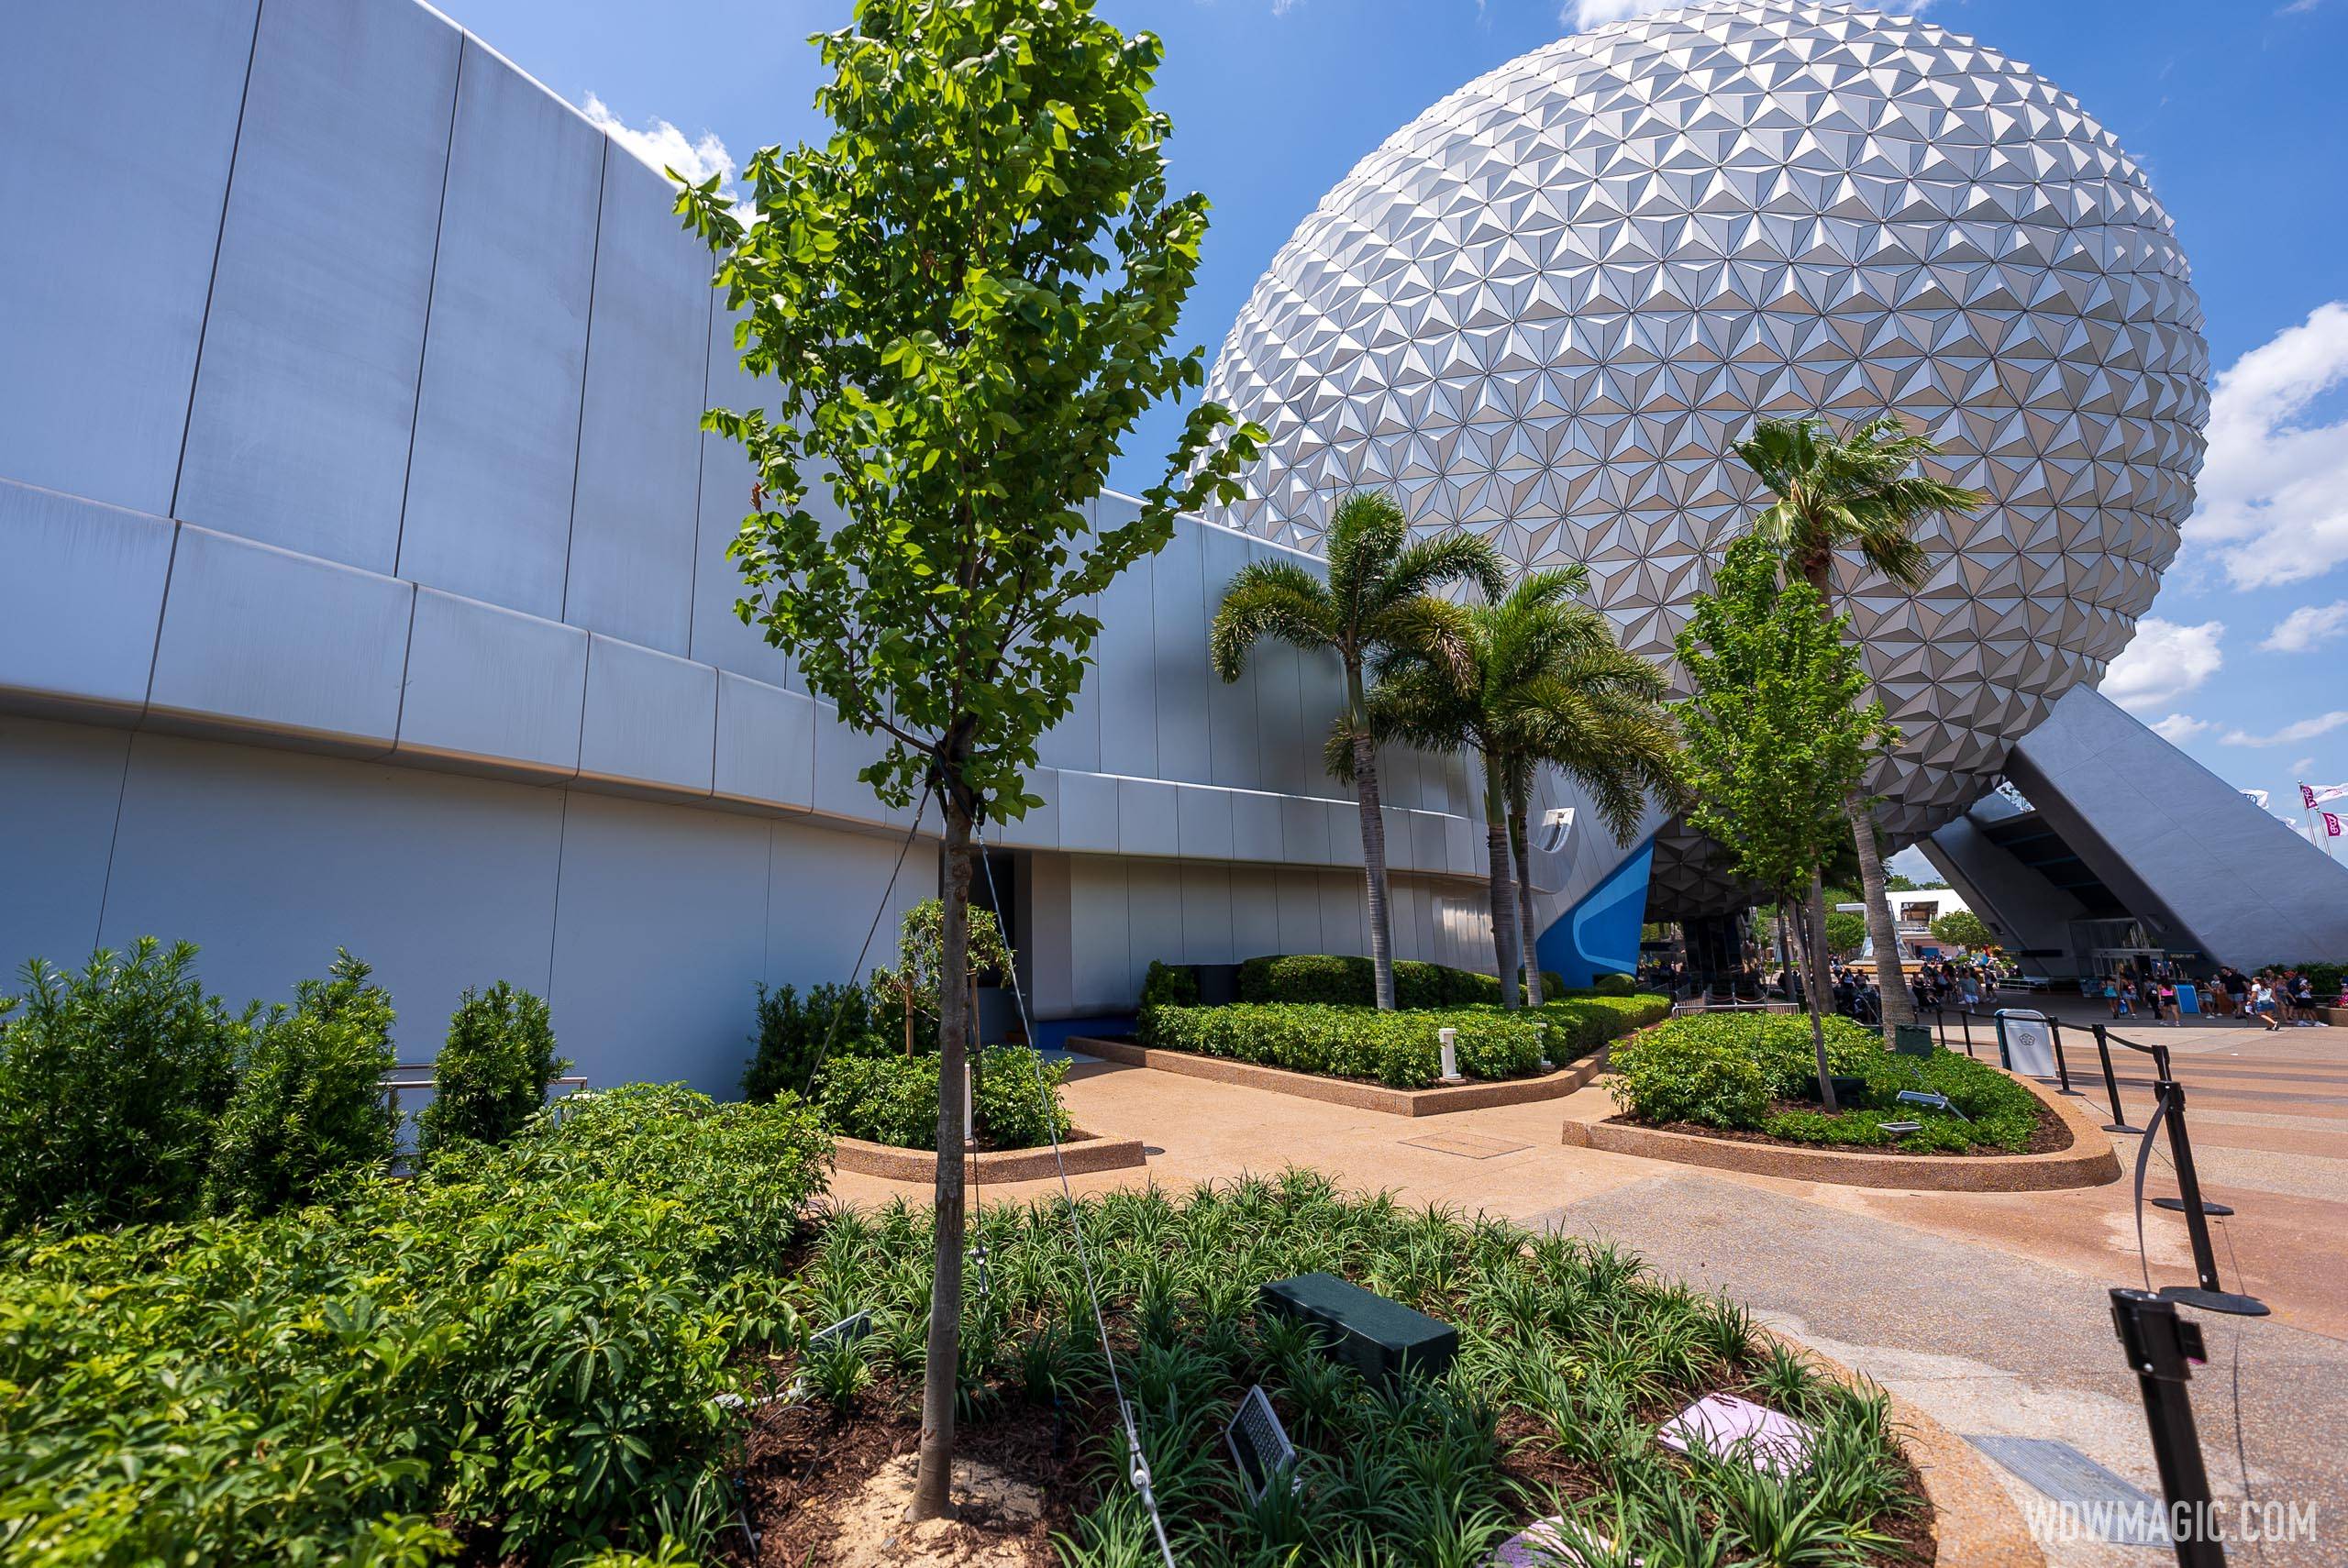 Construction walls removed near Spaceship Earth revealing new landscaping